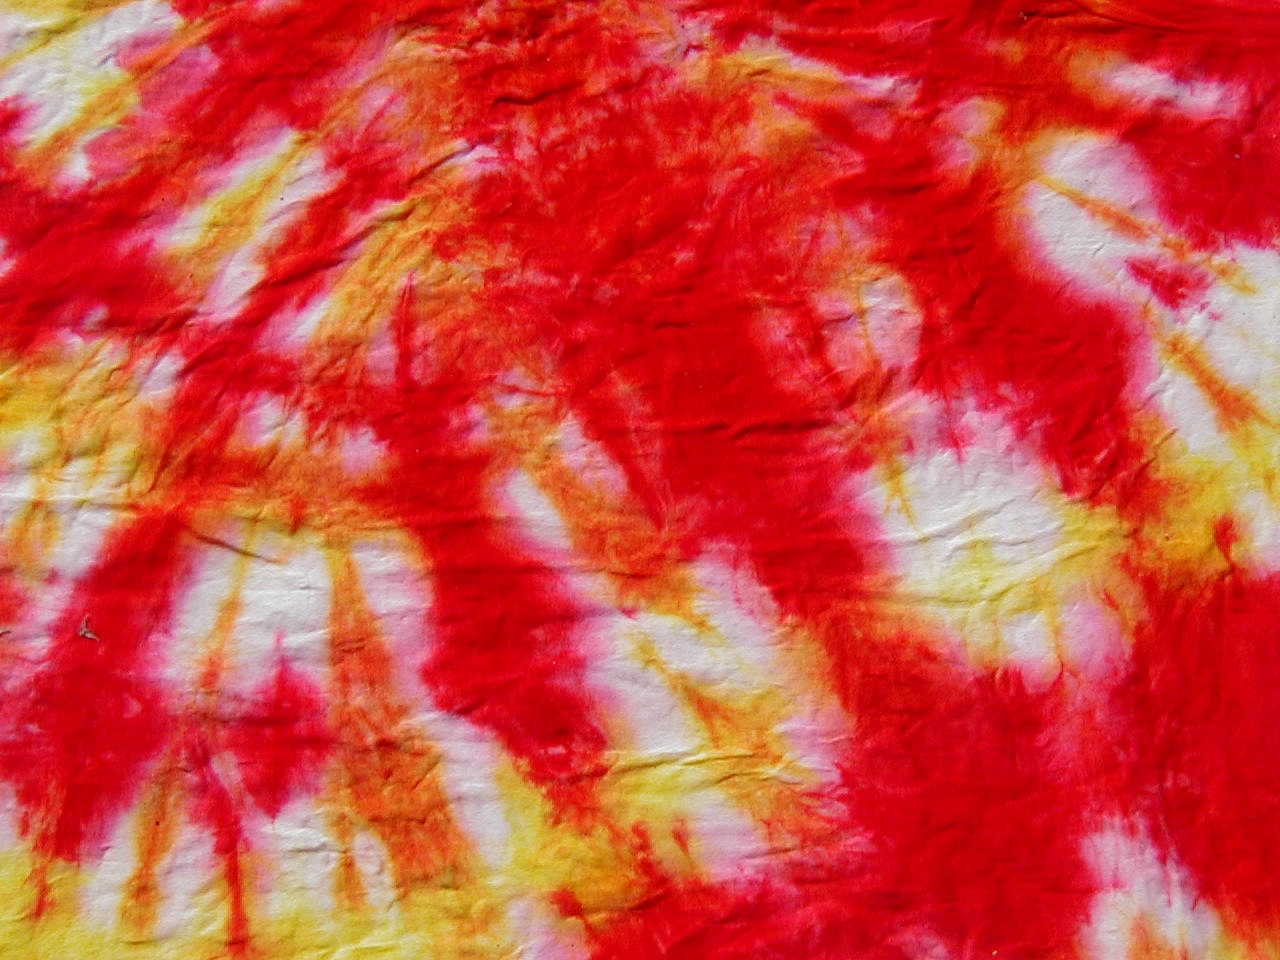 Click Here to design your own "Tie Dye" Myspace Background.